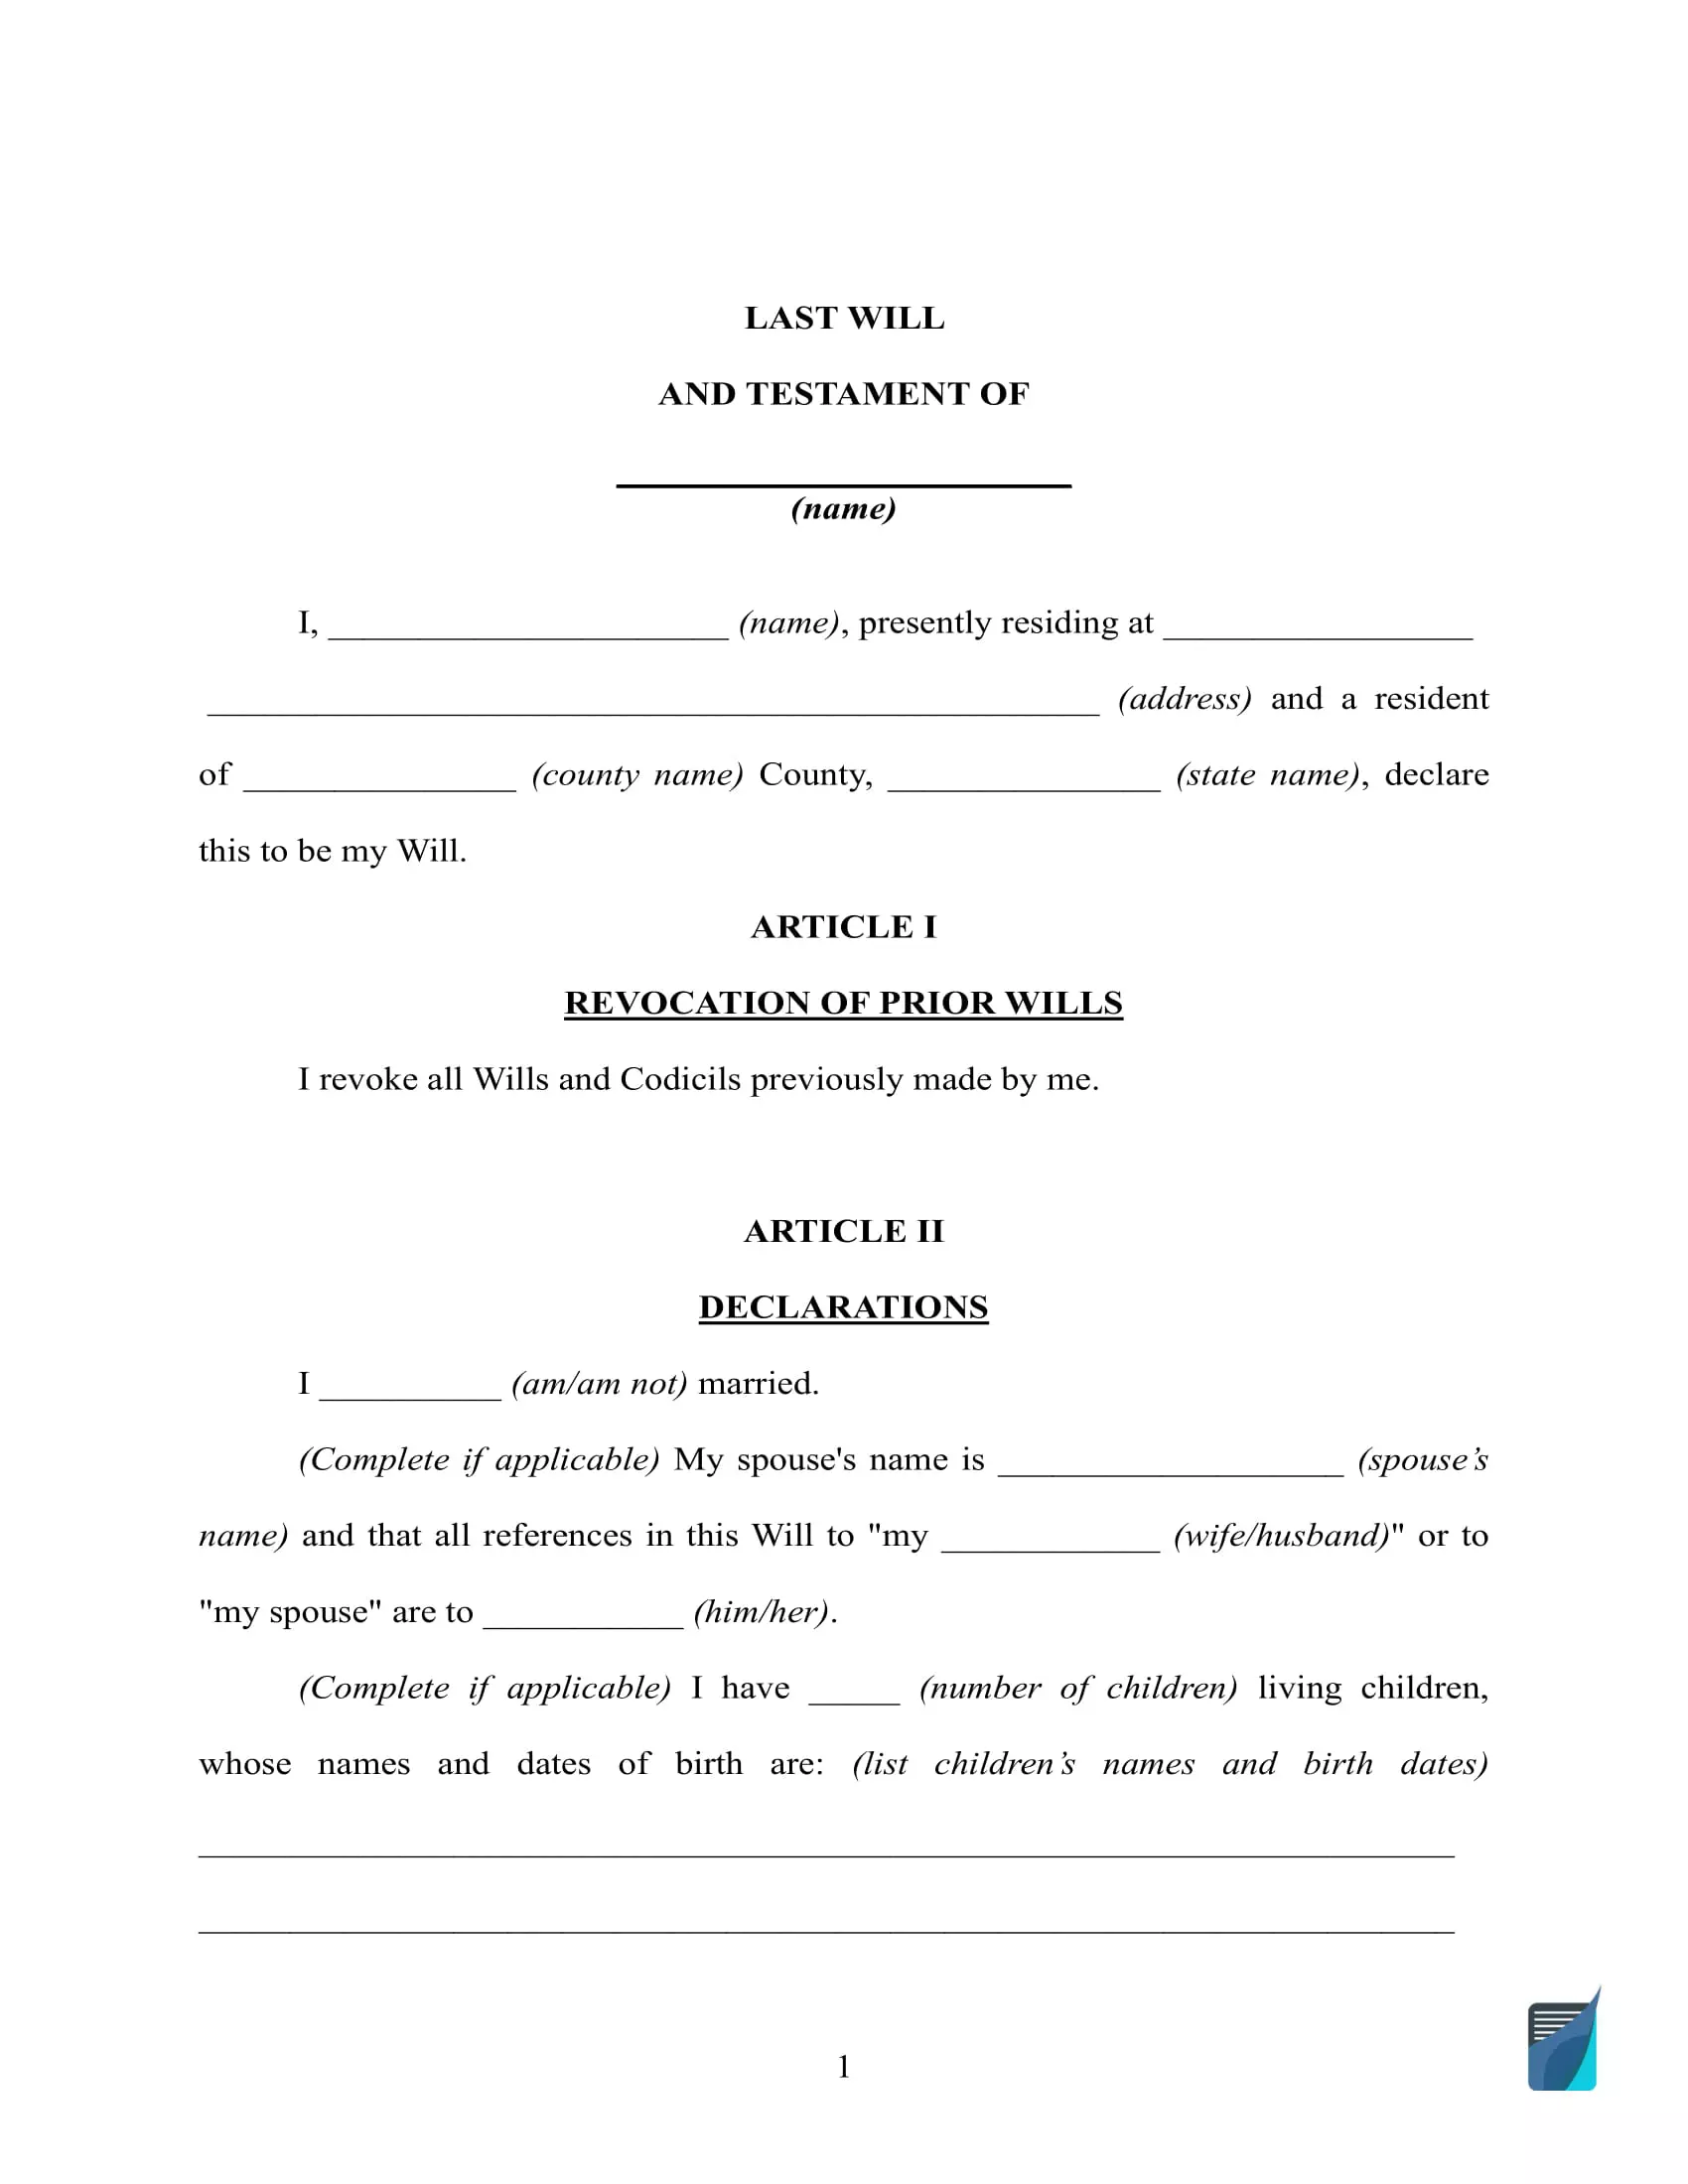 Free Last Will and Testament Template ⇒ Printable Forms Online